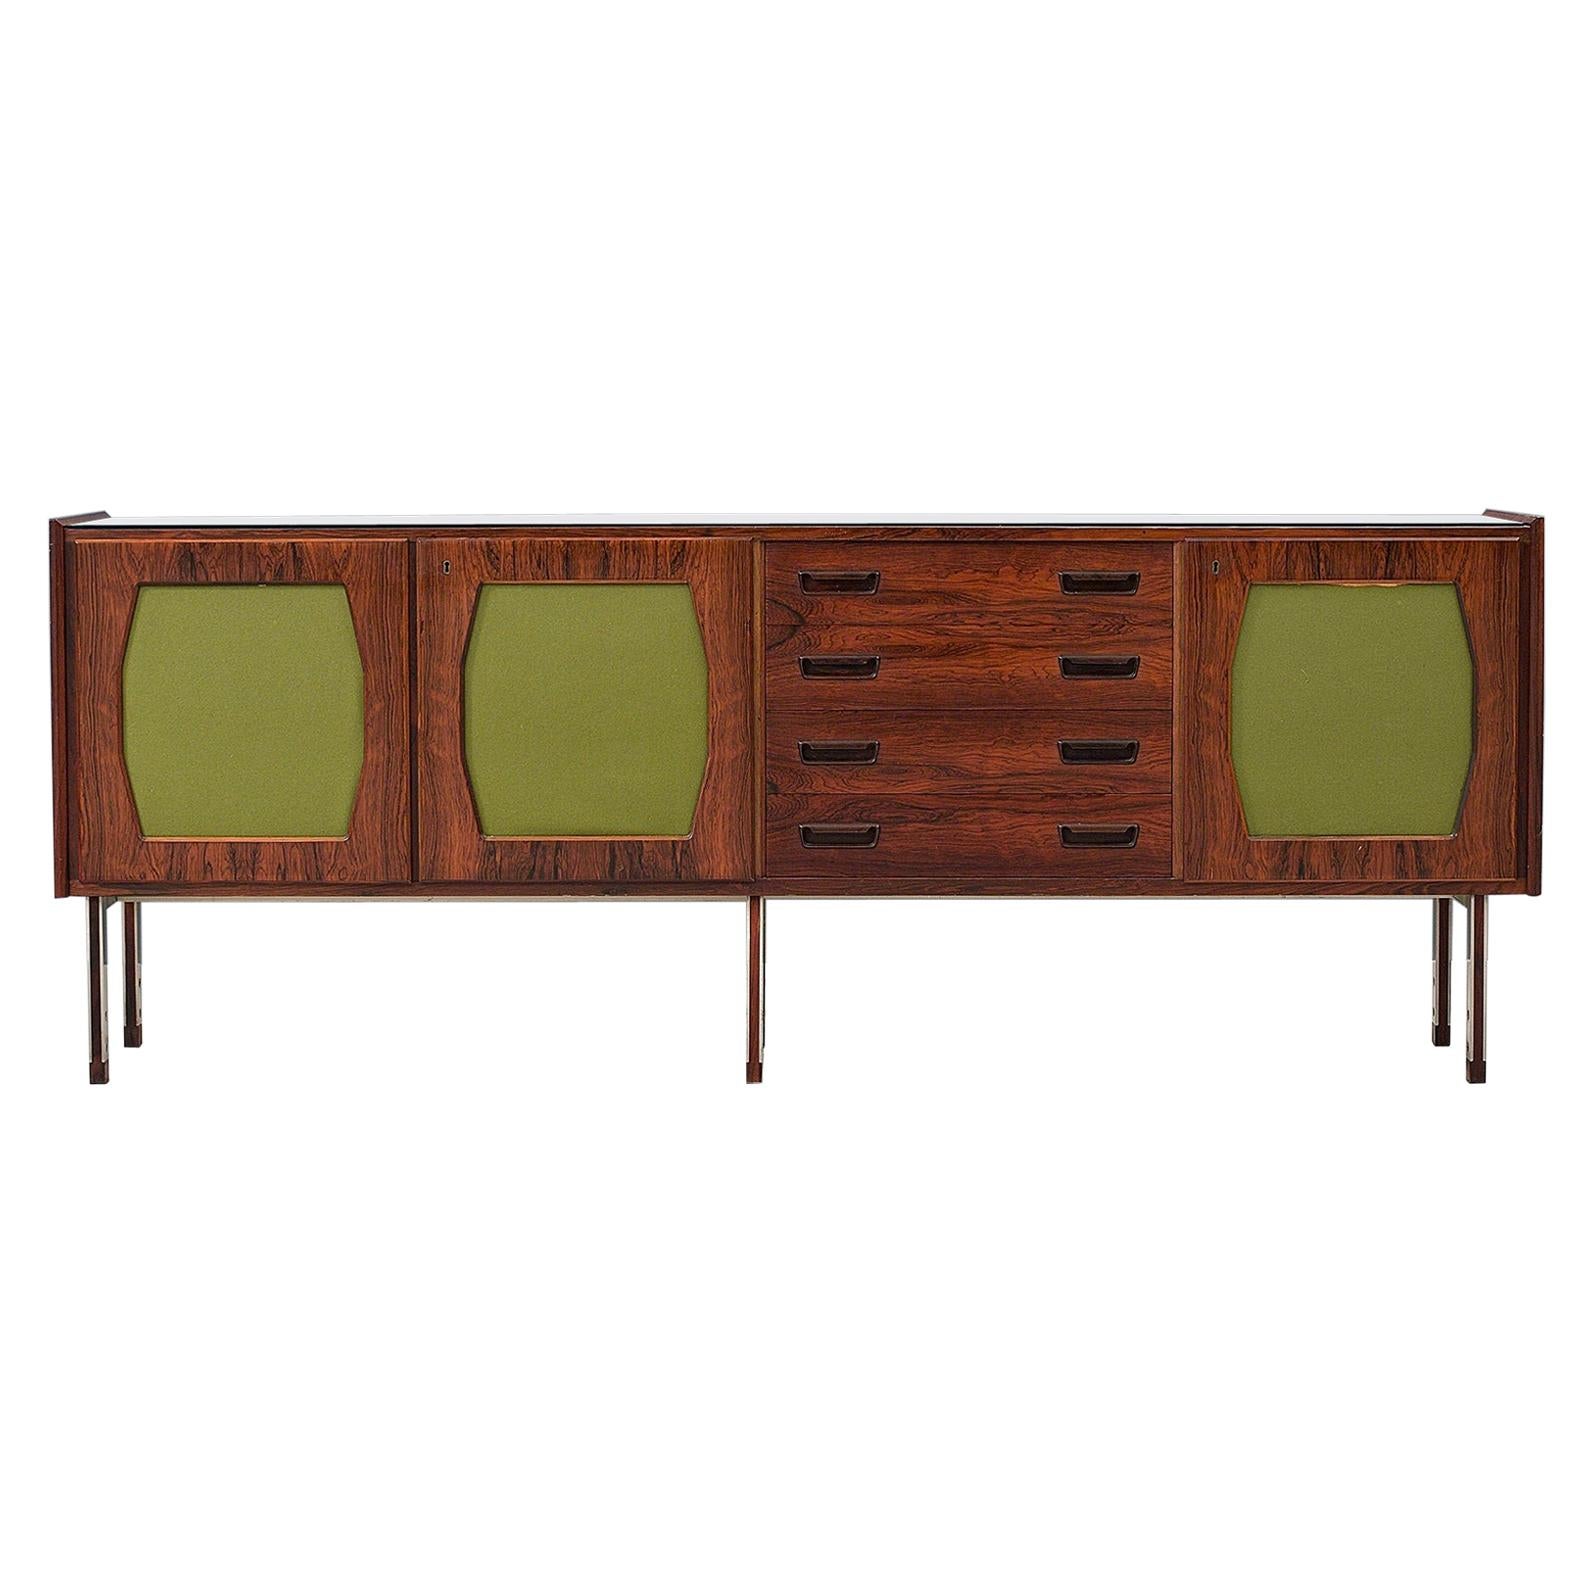 Large Italian Credenza in Rosewood, Felt, Glass and Metal, 1960s